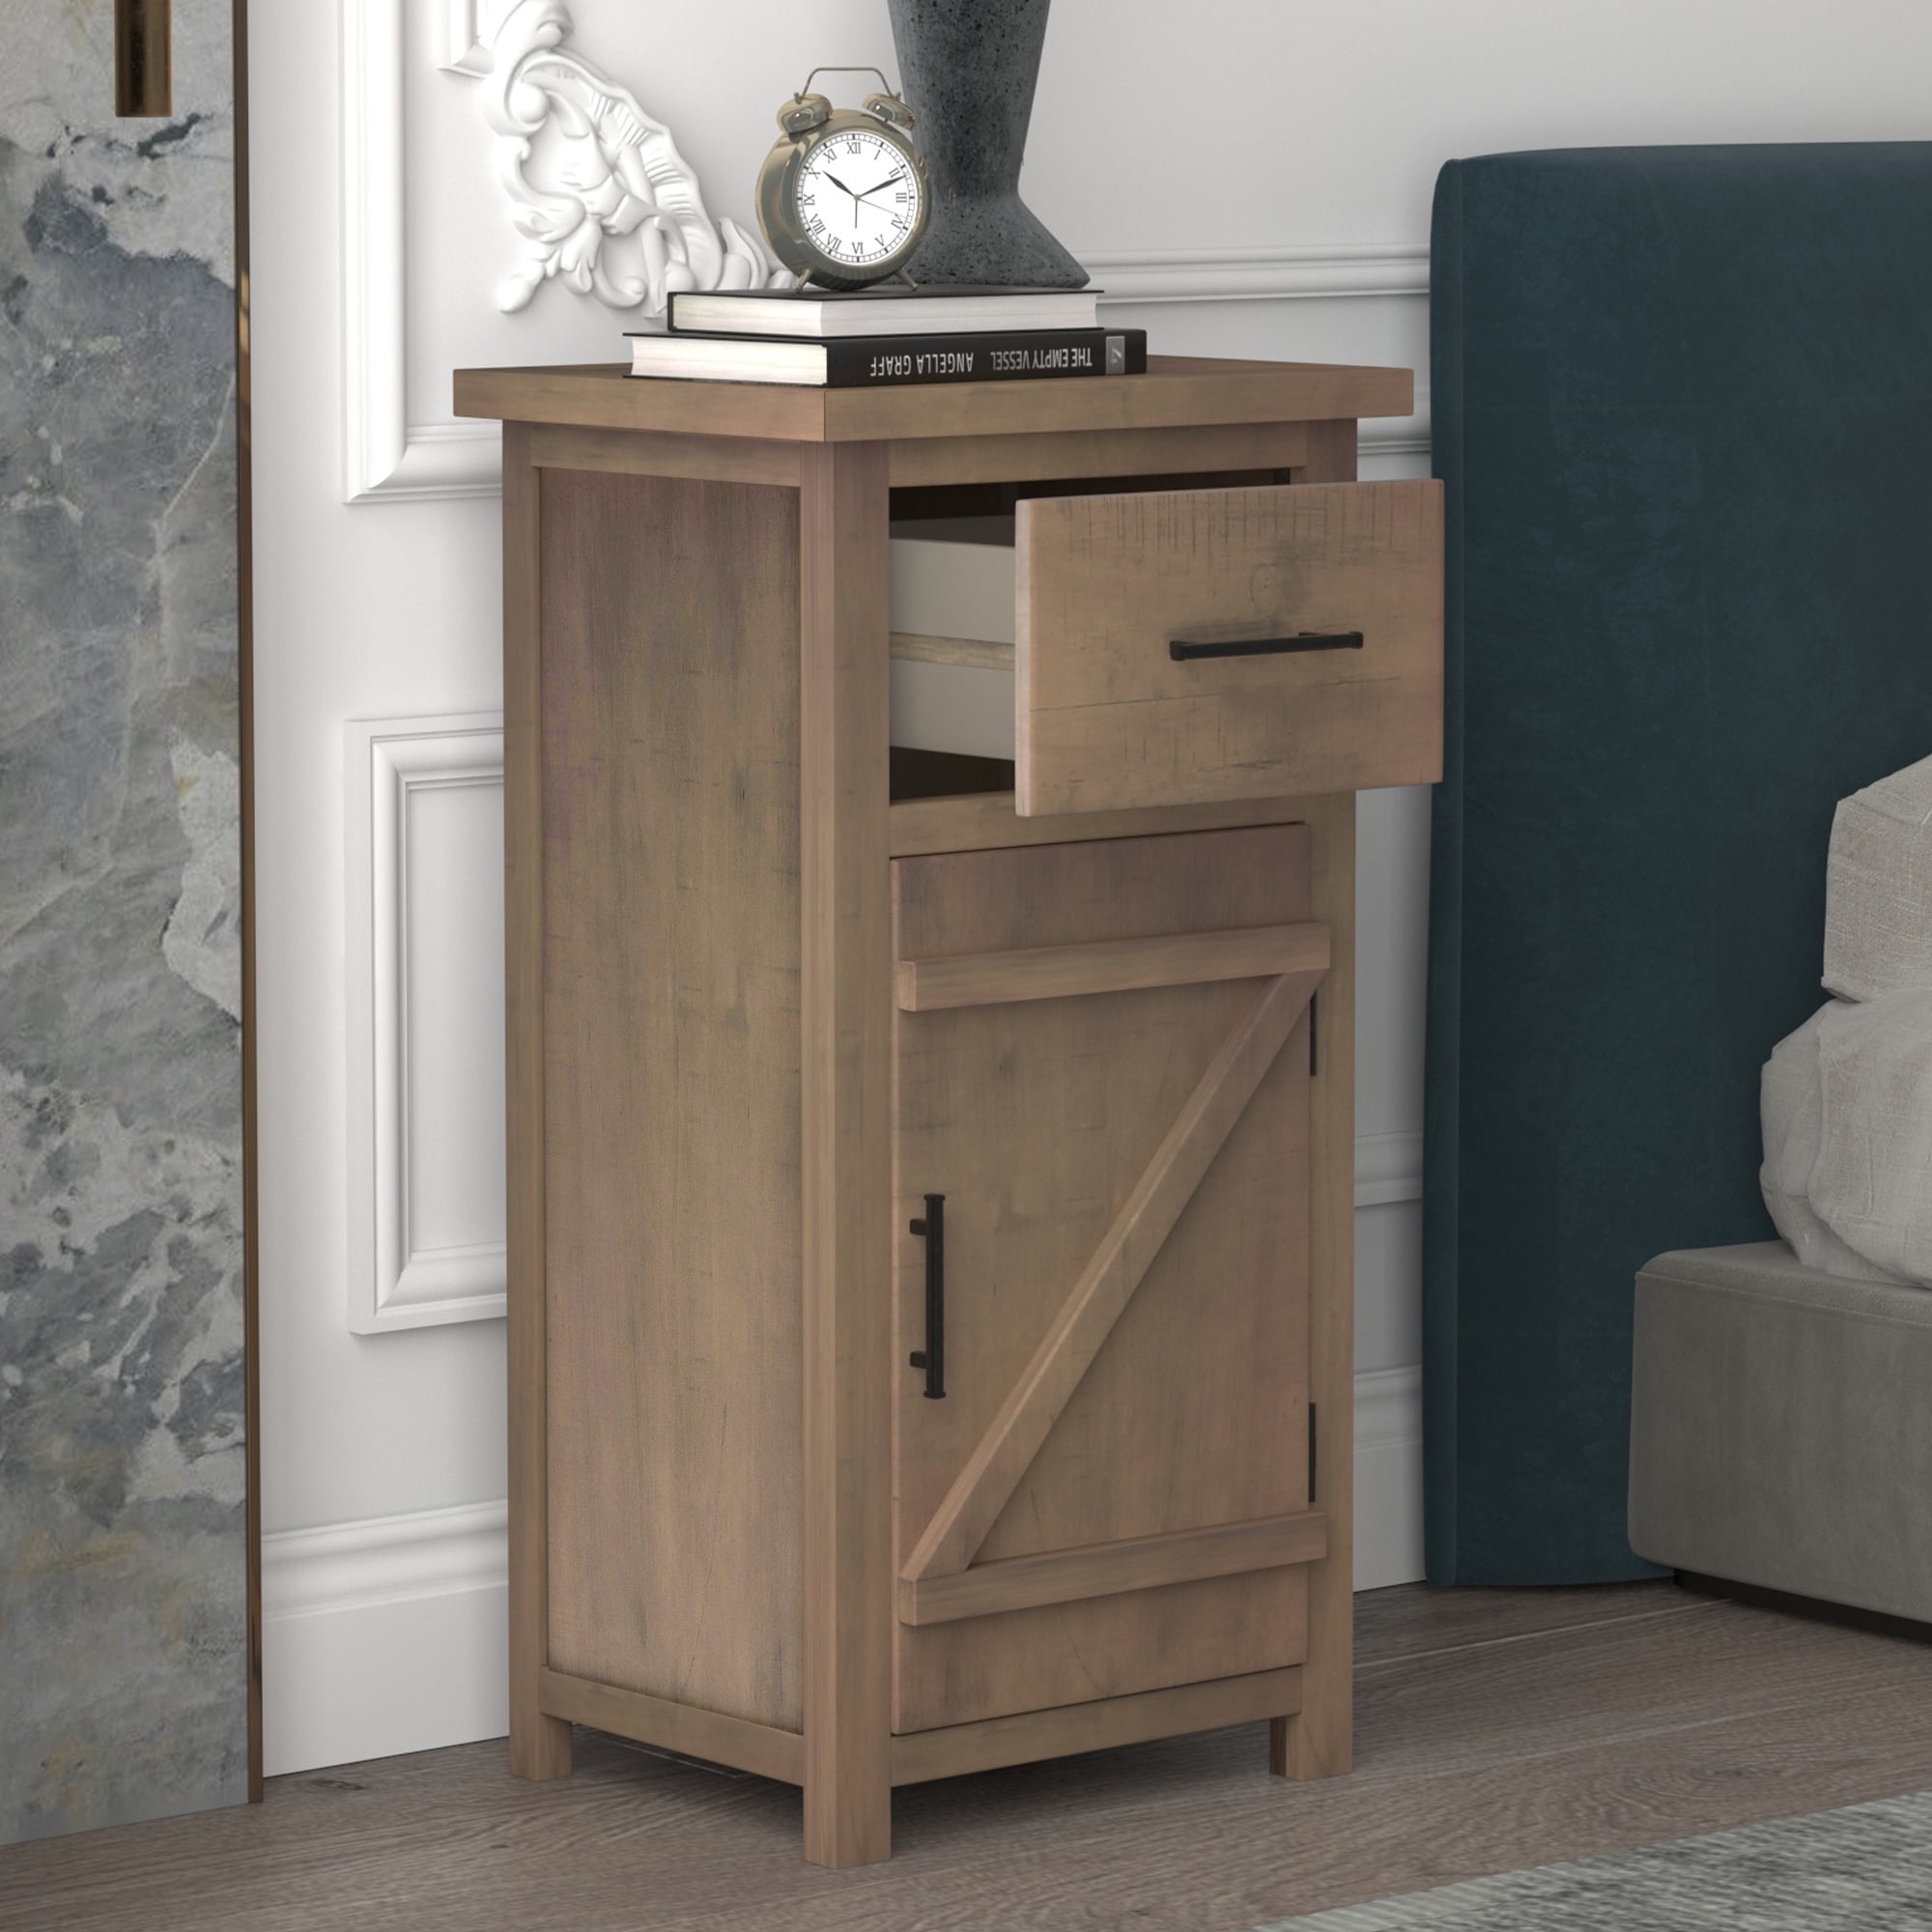 End Table Nightstand Bedside Cabinet with Lock Modern Wooden Side Table Floor Standing Cabinet for Bedroom Living Room Furniture Chest of Drawers